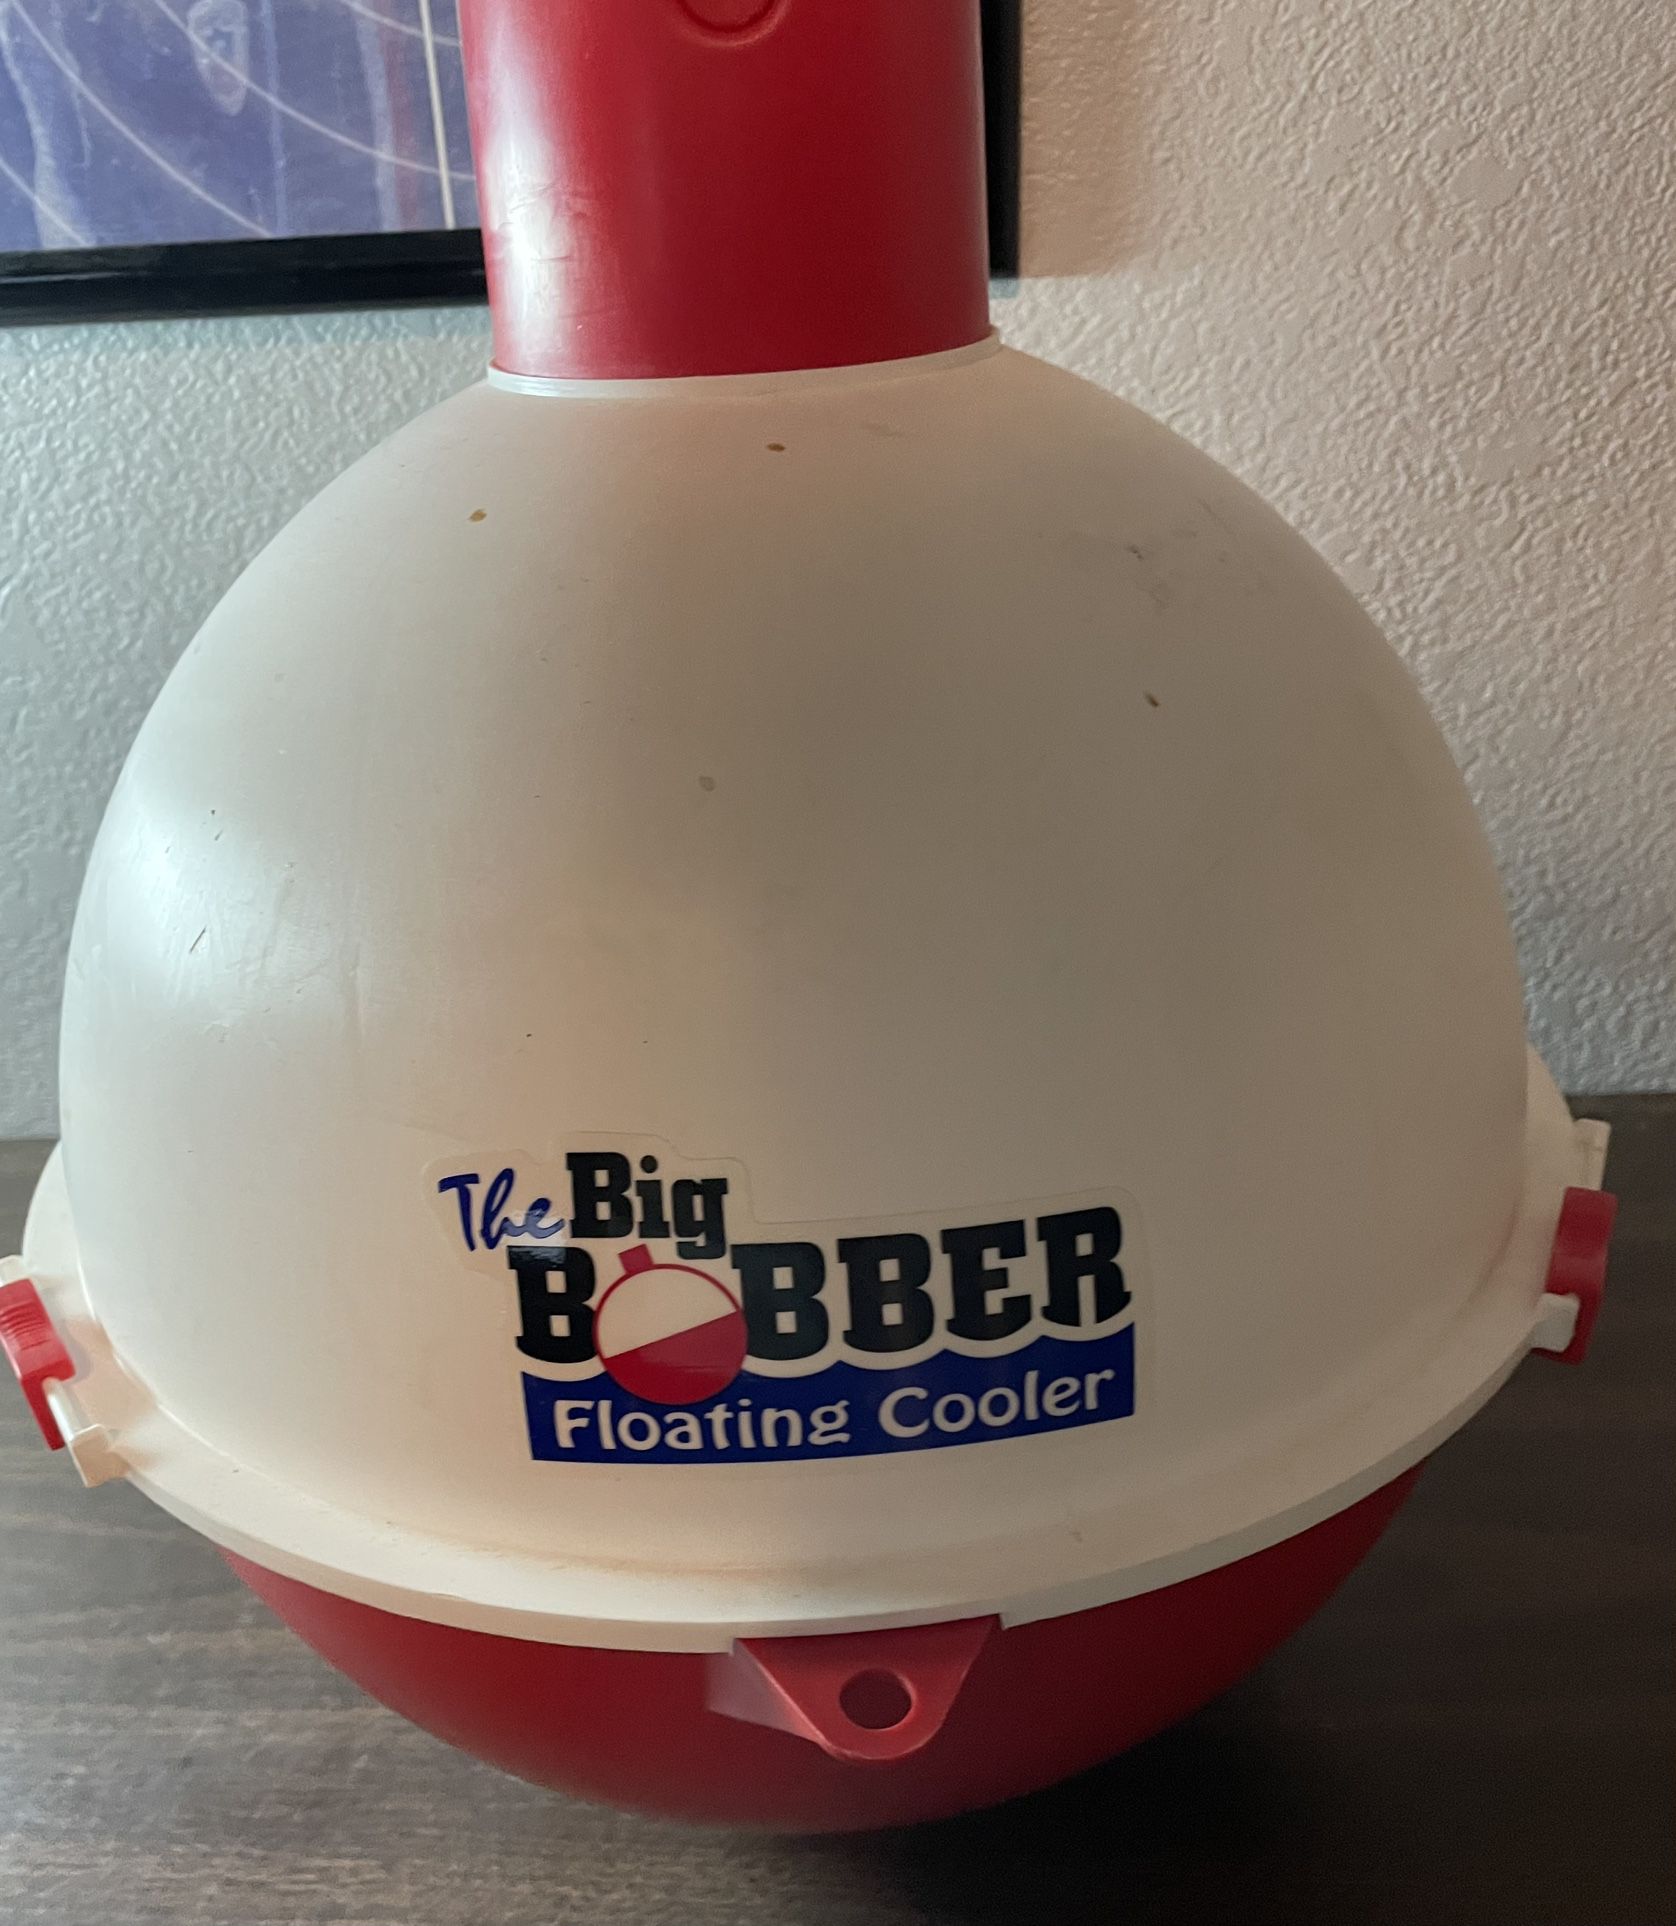 The Big Bobber Floating Cooler, Ice Chest, Red And White. Never Used.